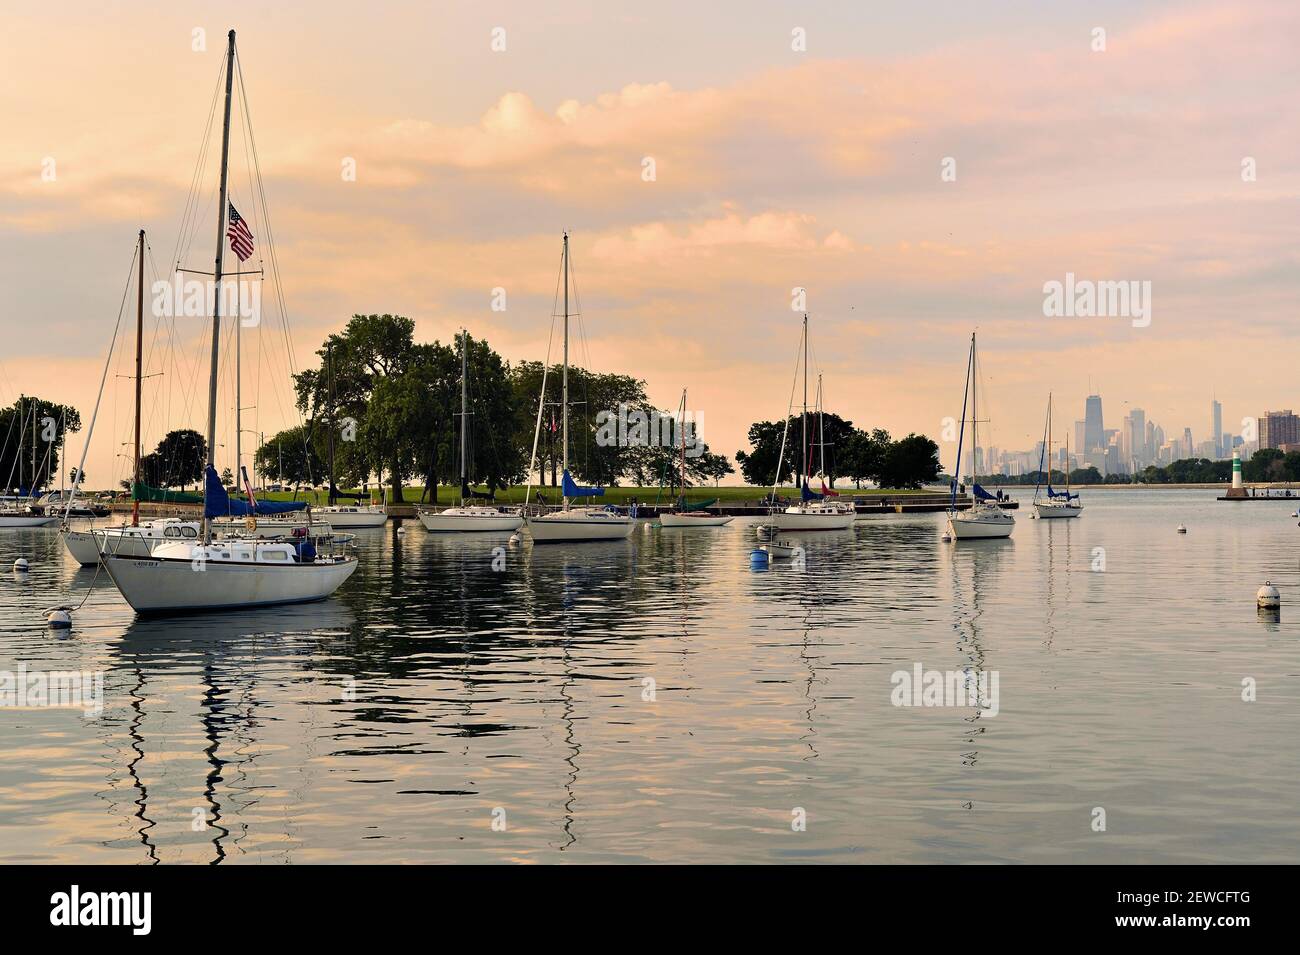 Chicago, Illinois, USA. Sailboats and pleasure craft rest within Chicago's Montrose Harbor shortly after sunrise on the Fourth of July. Stock Photo